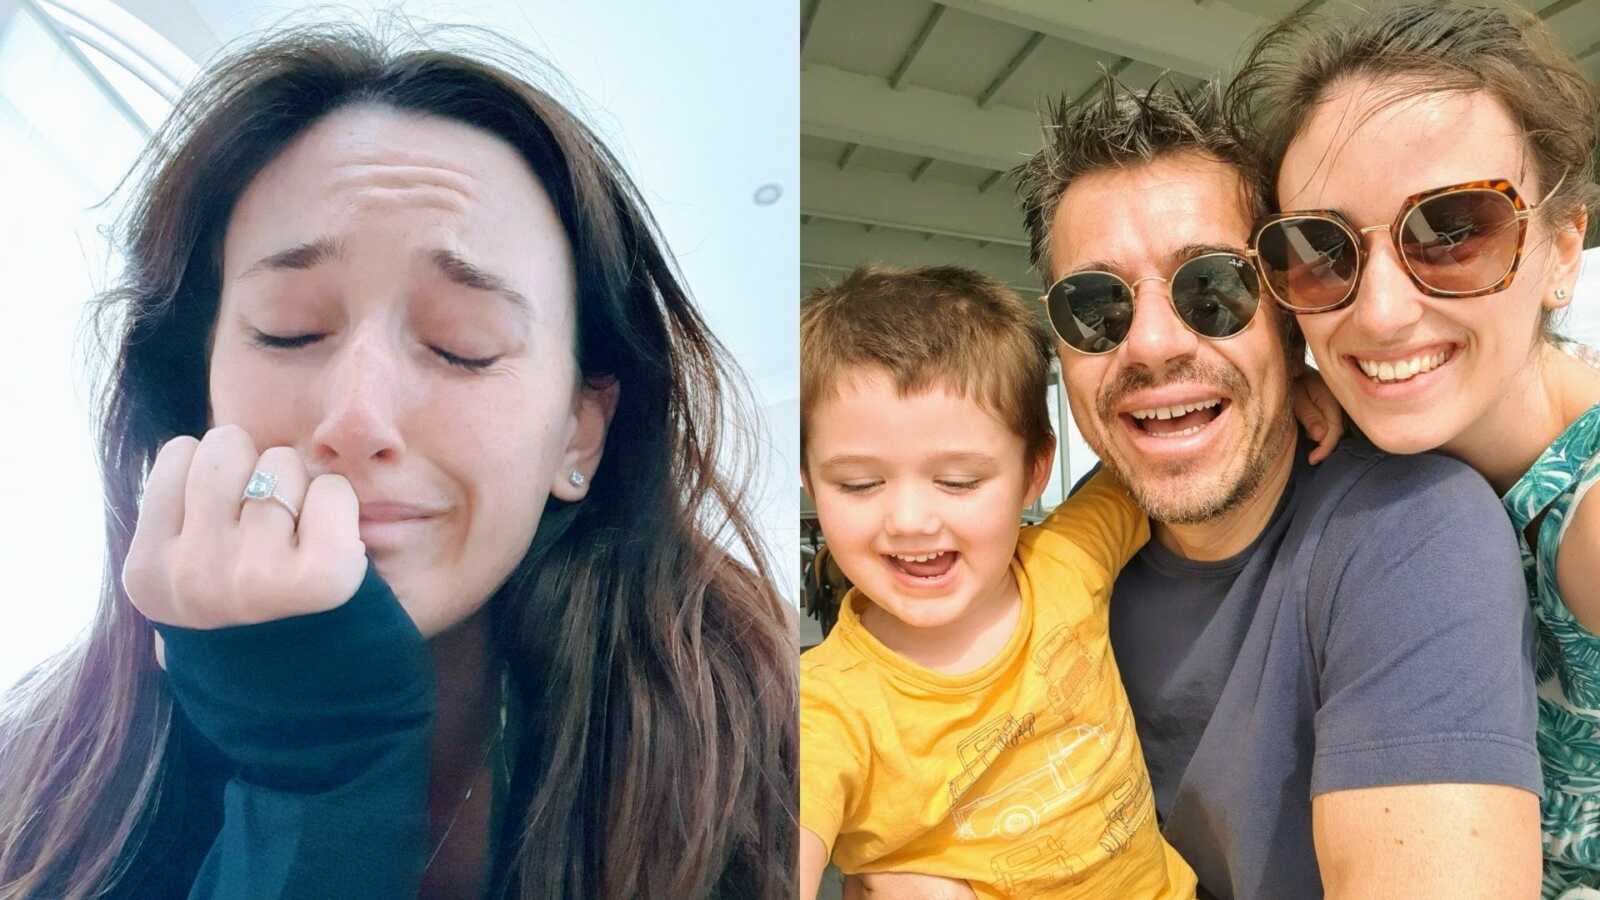 On the left, woman trying to escape an abusive relationship takes a selfie while crying, on the right, same woman smiles with her new boyfriend and son